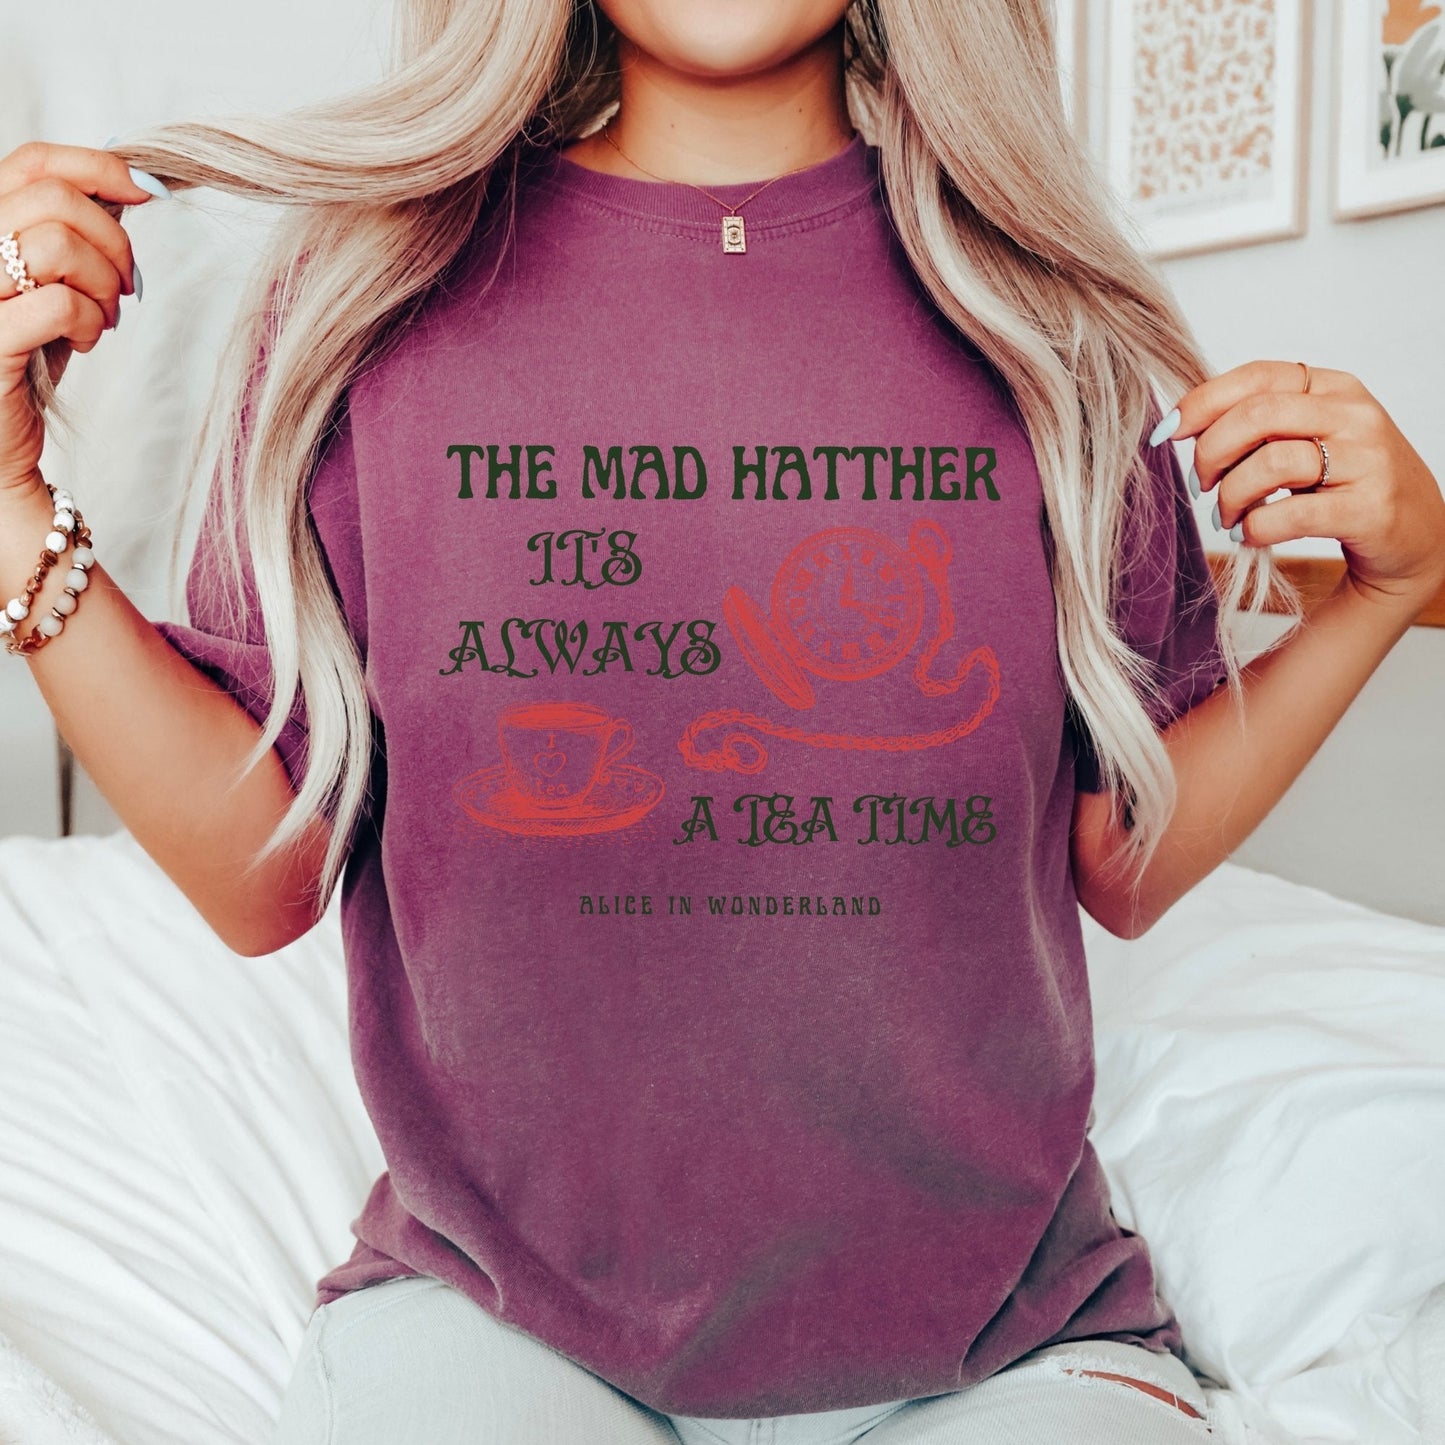 The Mad Hatter It's Always A Tea Time T-Shirt Tee Shirt Ladies Unisex Funny Humor Gift Present Birthday Alice in Wonderland Tea Party - AFADesignsCo